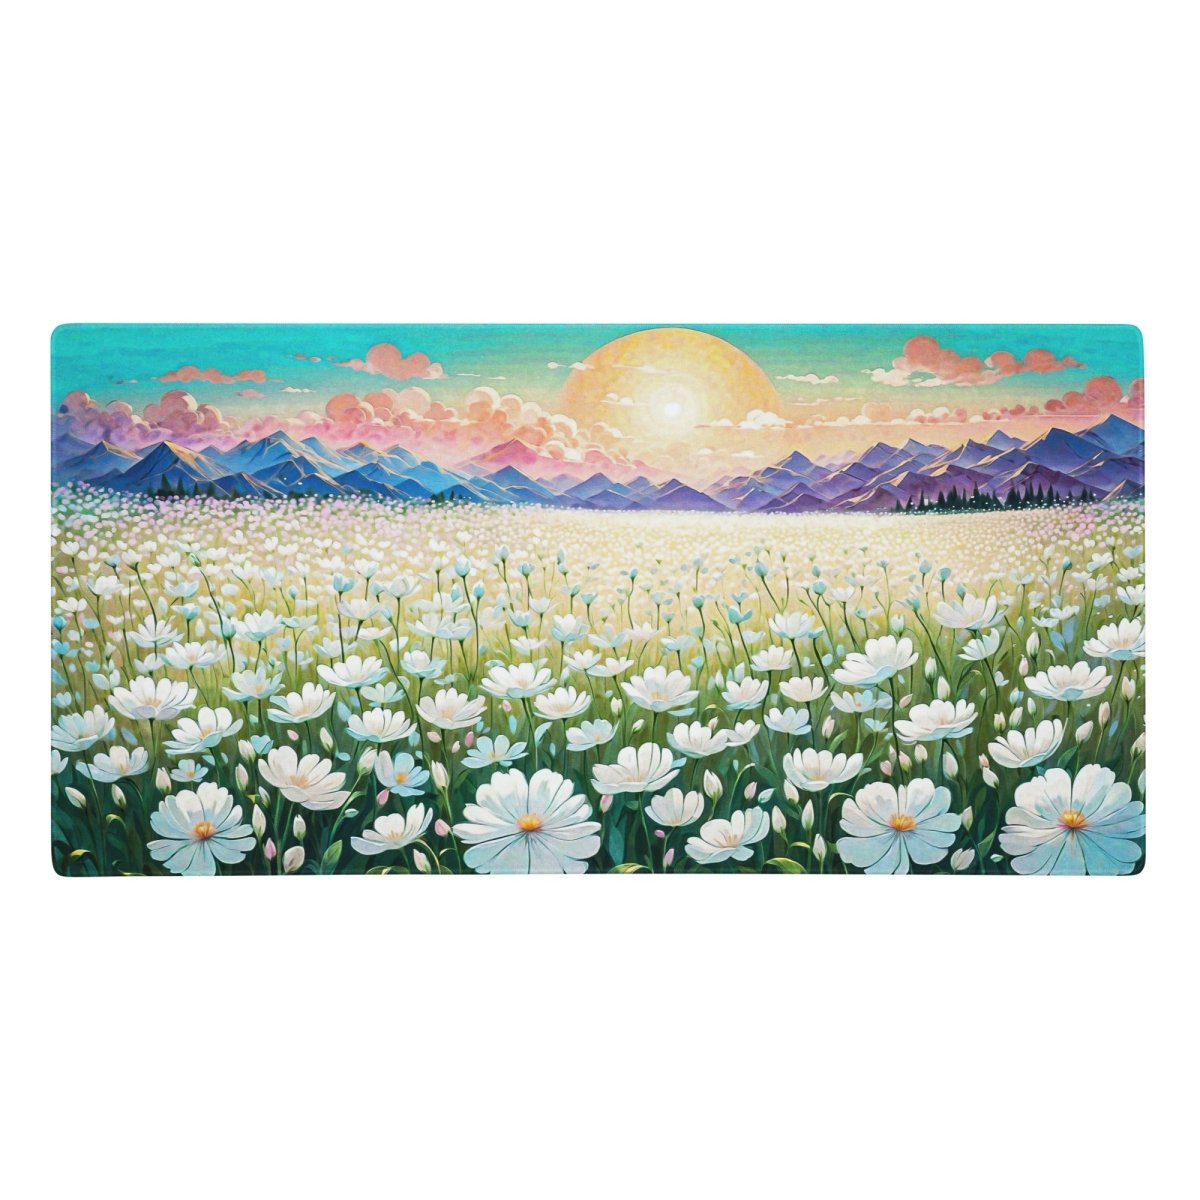 Sunset daisies - Gaming mouse pad - Ever colorful